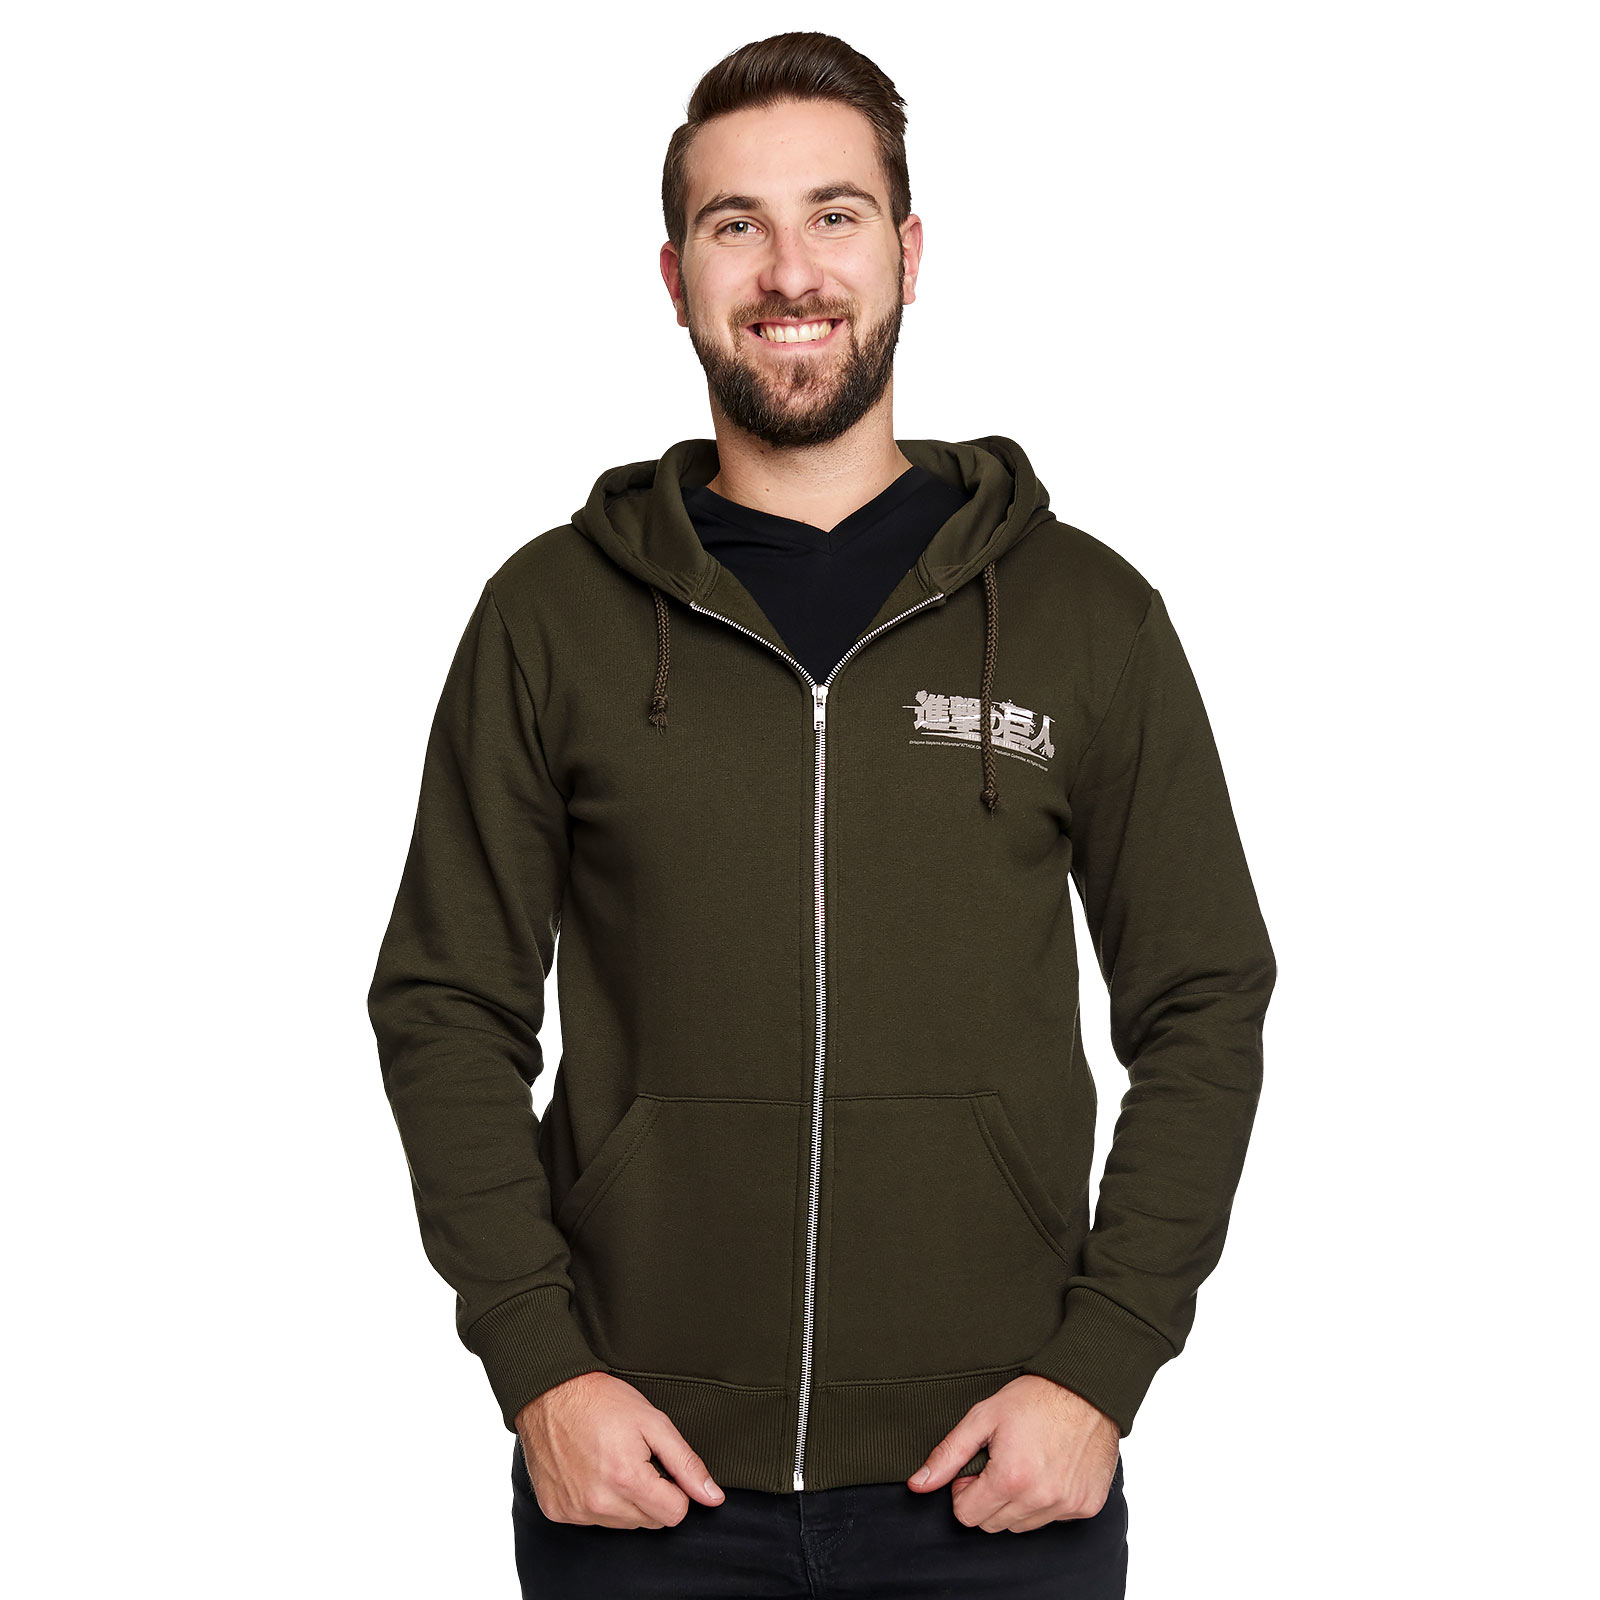 Attack on Titan - Survey Corps Hoodie